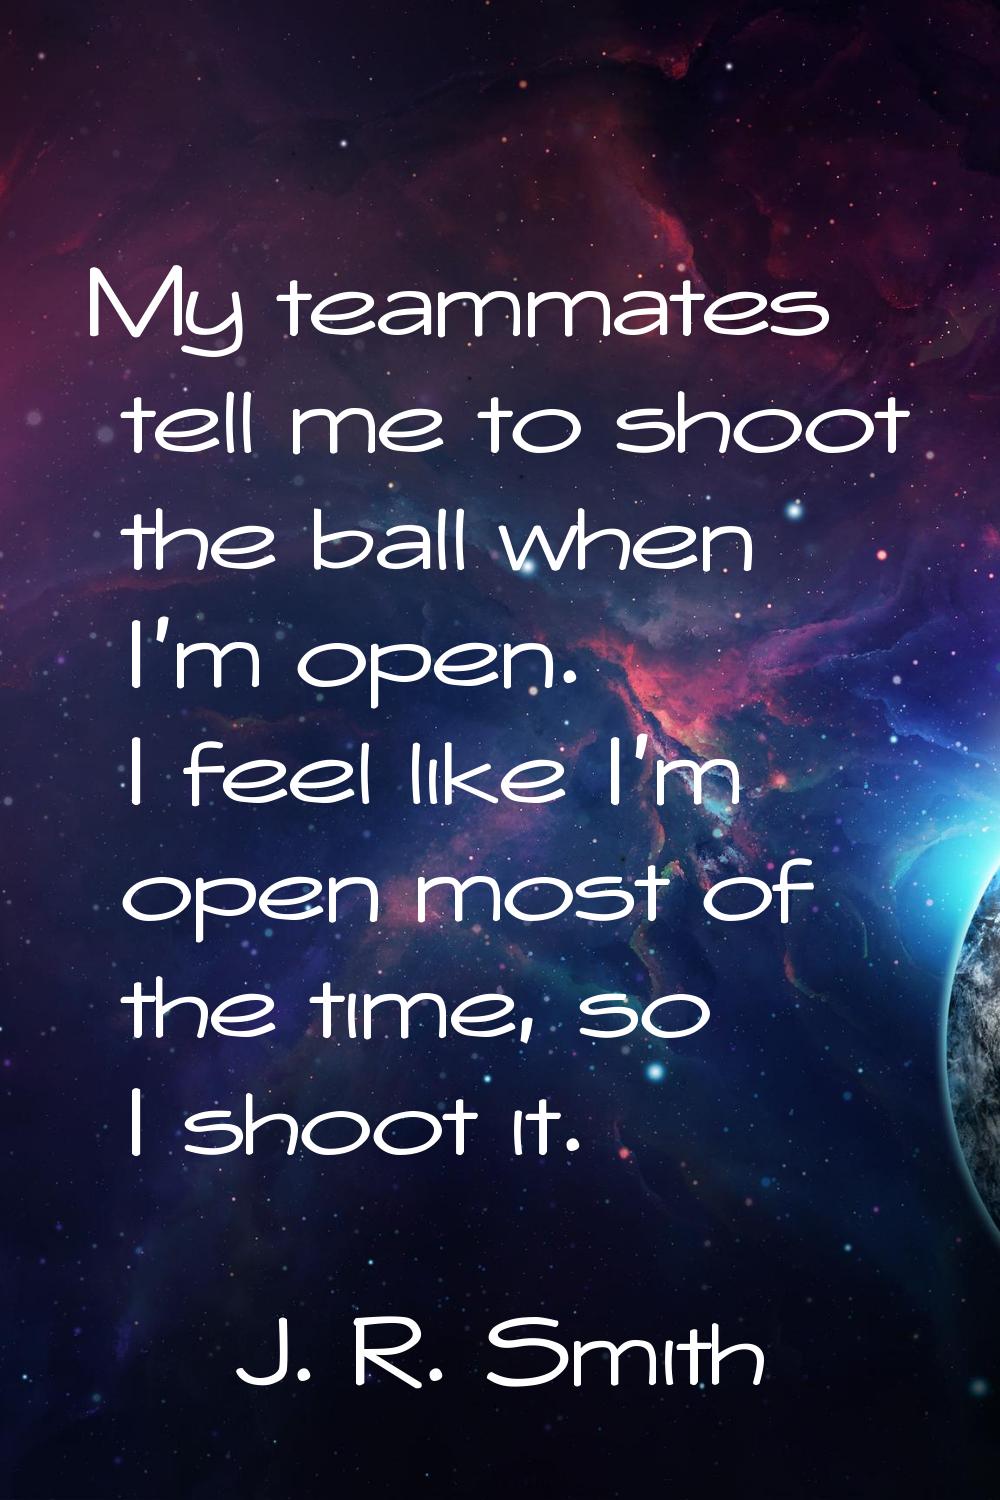 My teammates tell me to shoot the ball when I'm open. I feel like I'm open most of the time, so I s